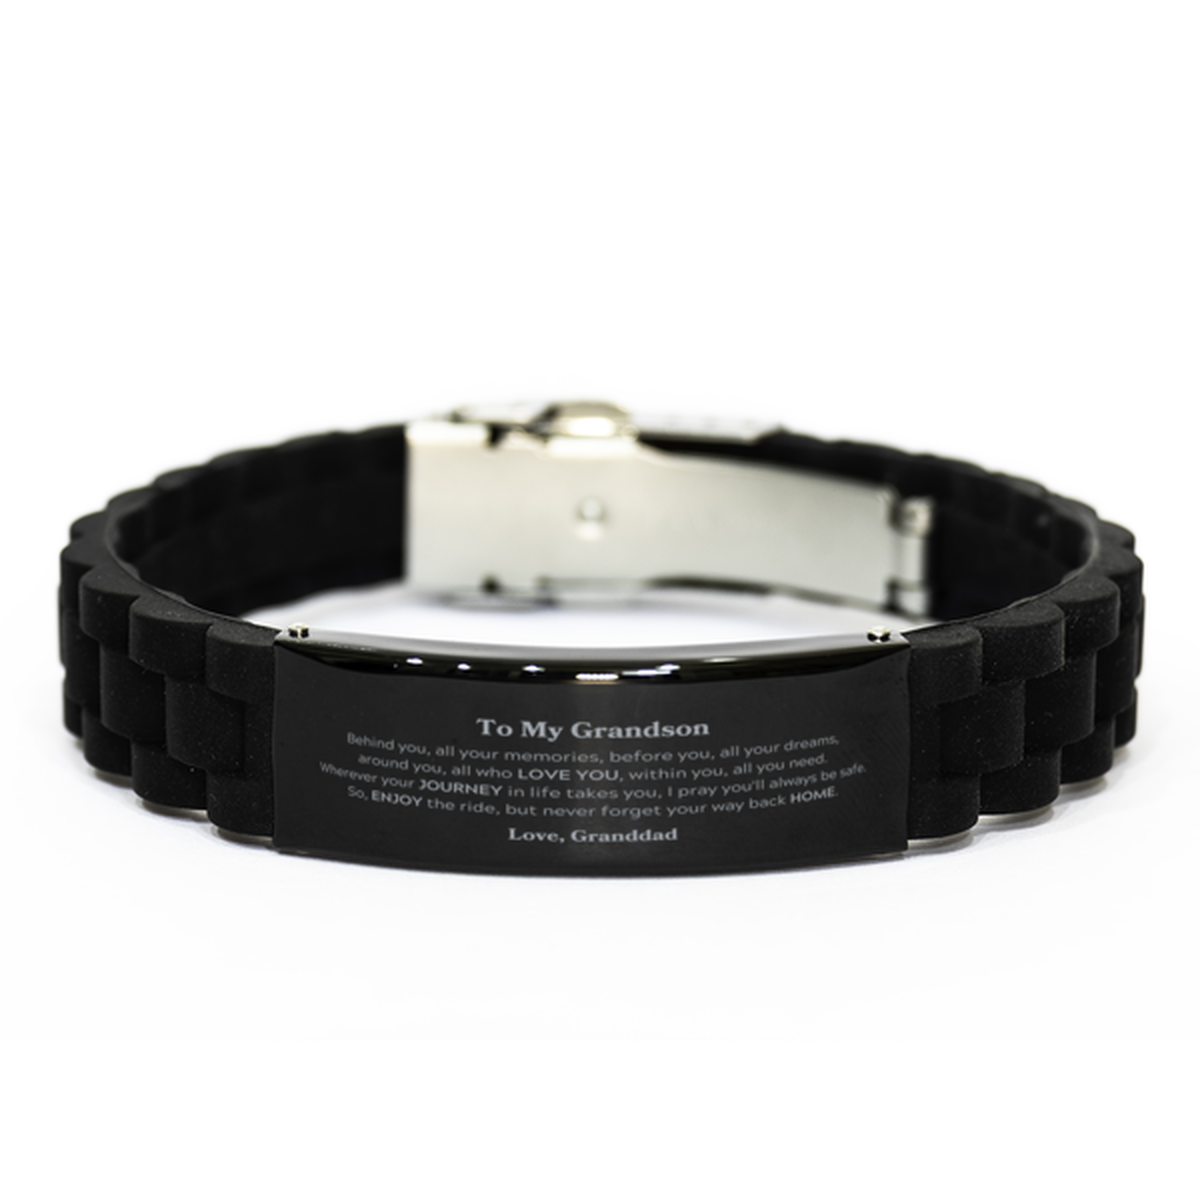 To My Grandson Graduation Gifts from Granddad, Grandson Black Glidelock Clasp Bracelet Christmas Birthday Gifts for Grandson Behind you, all your memories, before you, all your dreams. Love, Granddad